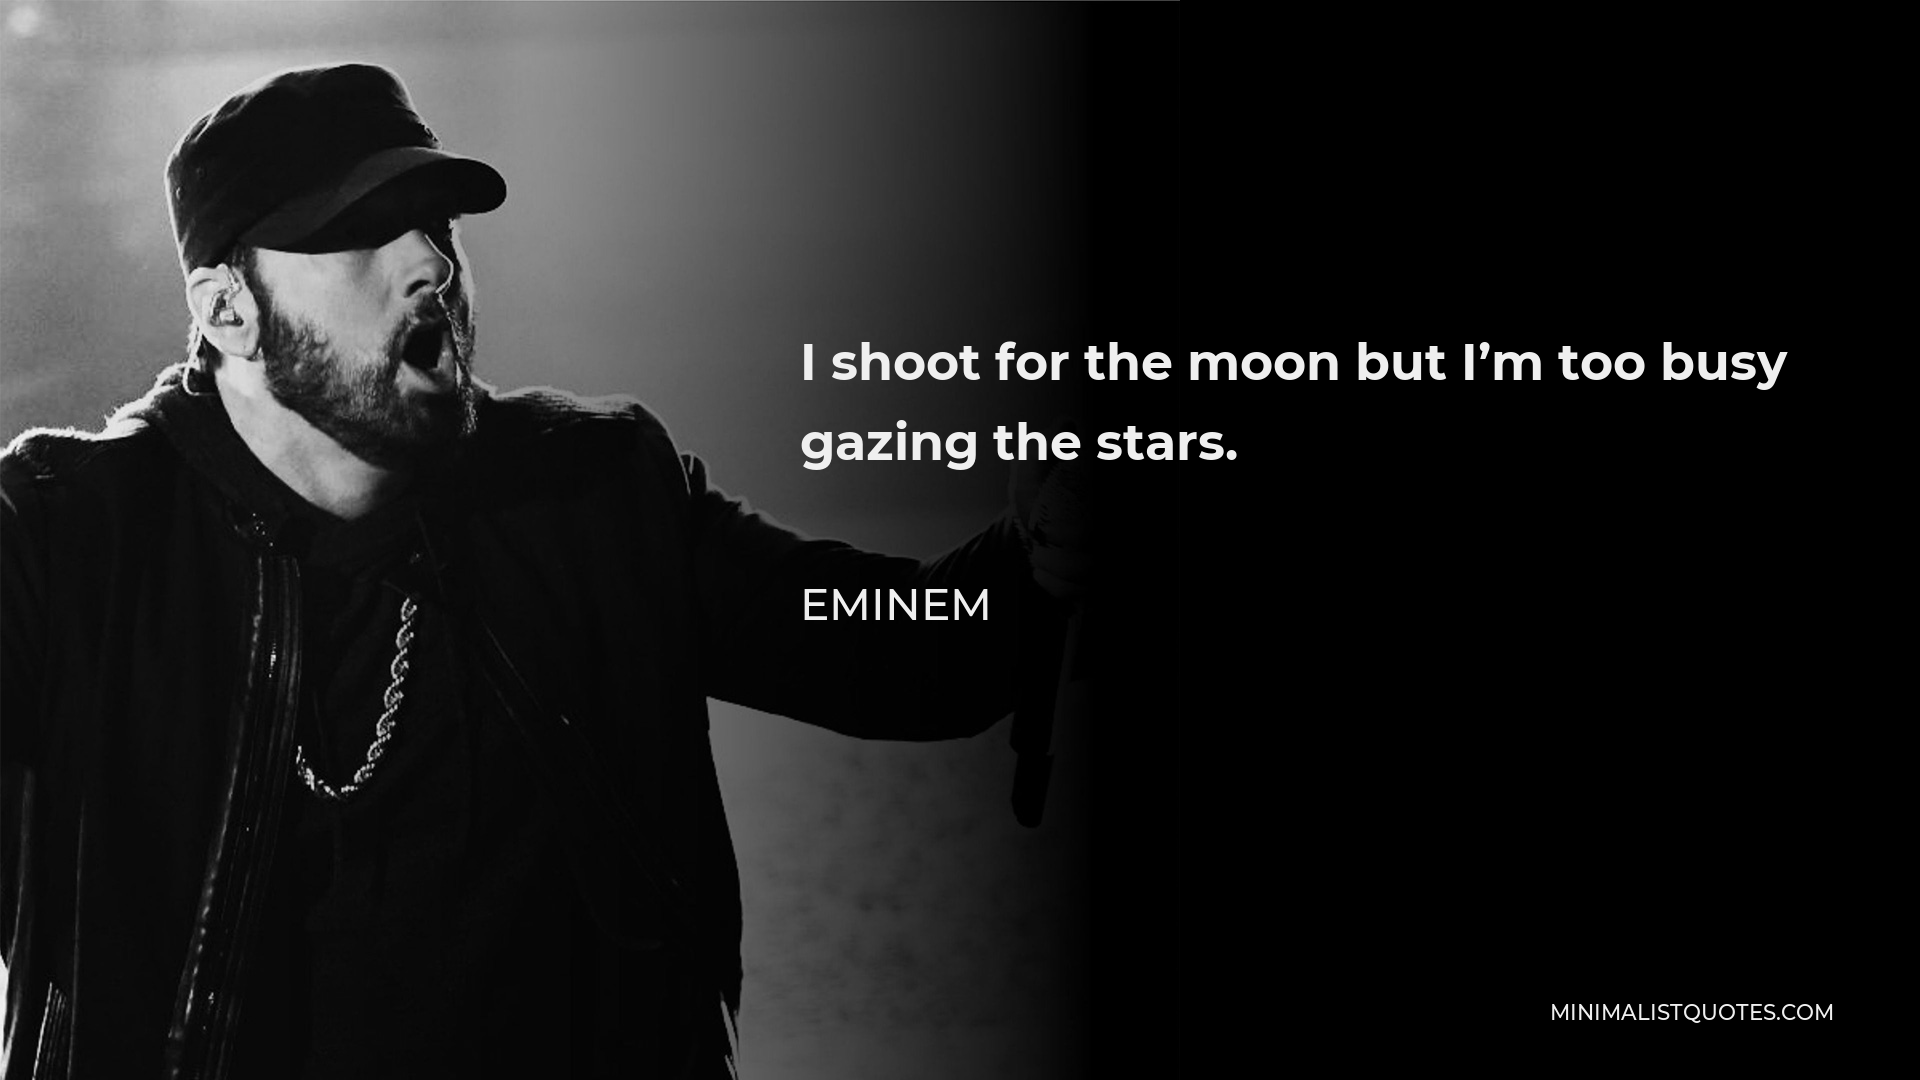 Eminem Quote - I shoot for the moon but I’m too busy gazing the stars.